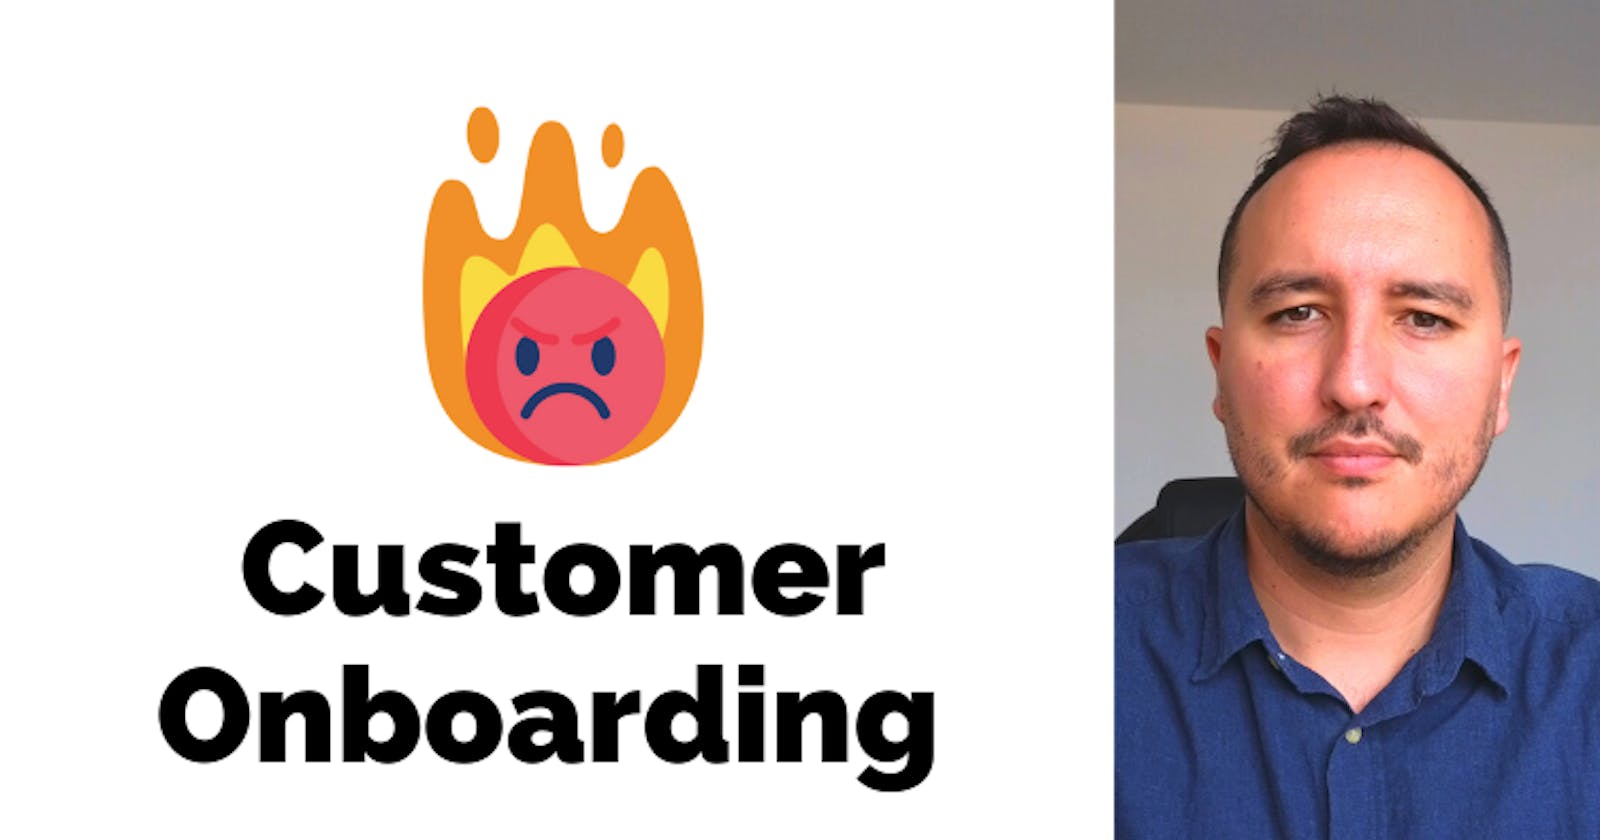 The problem with customer onboardings.